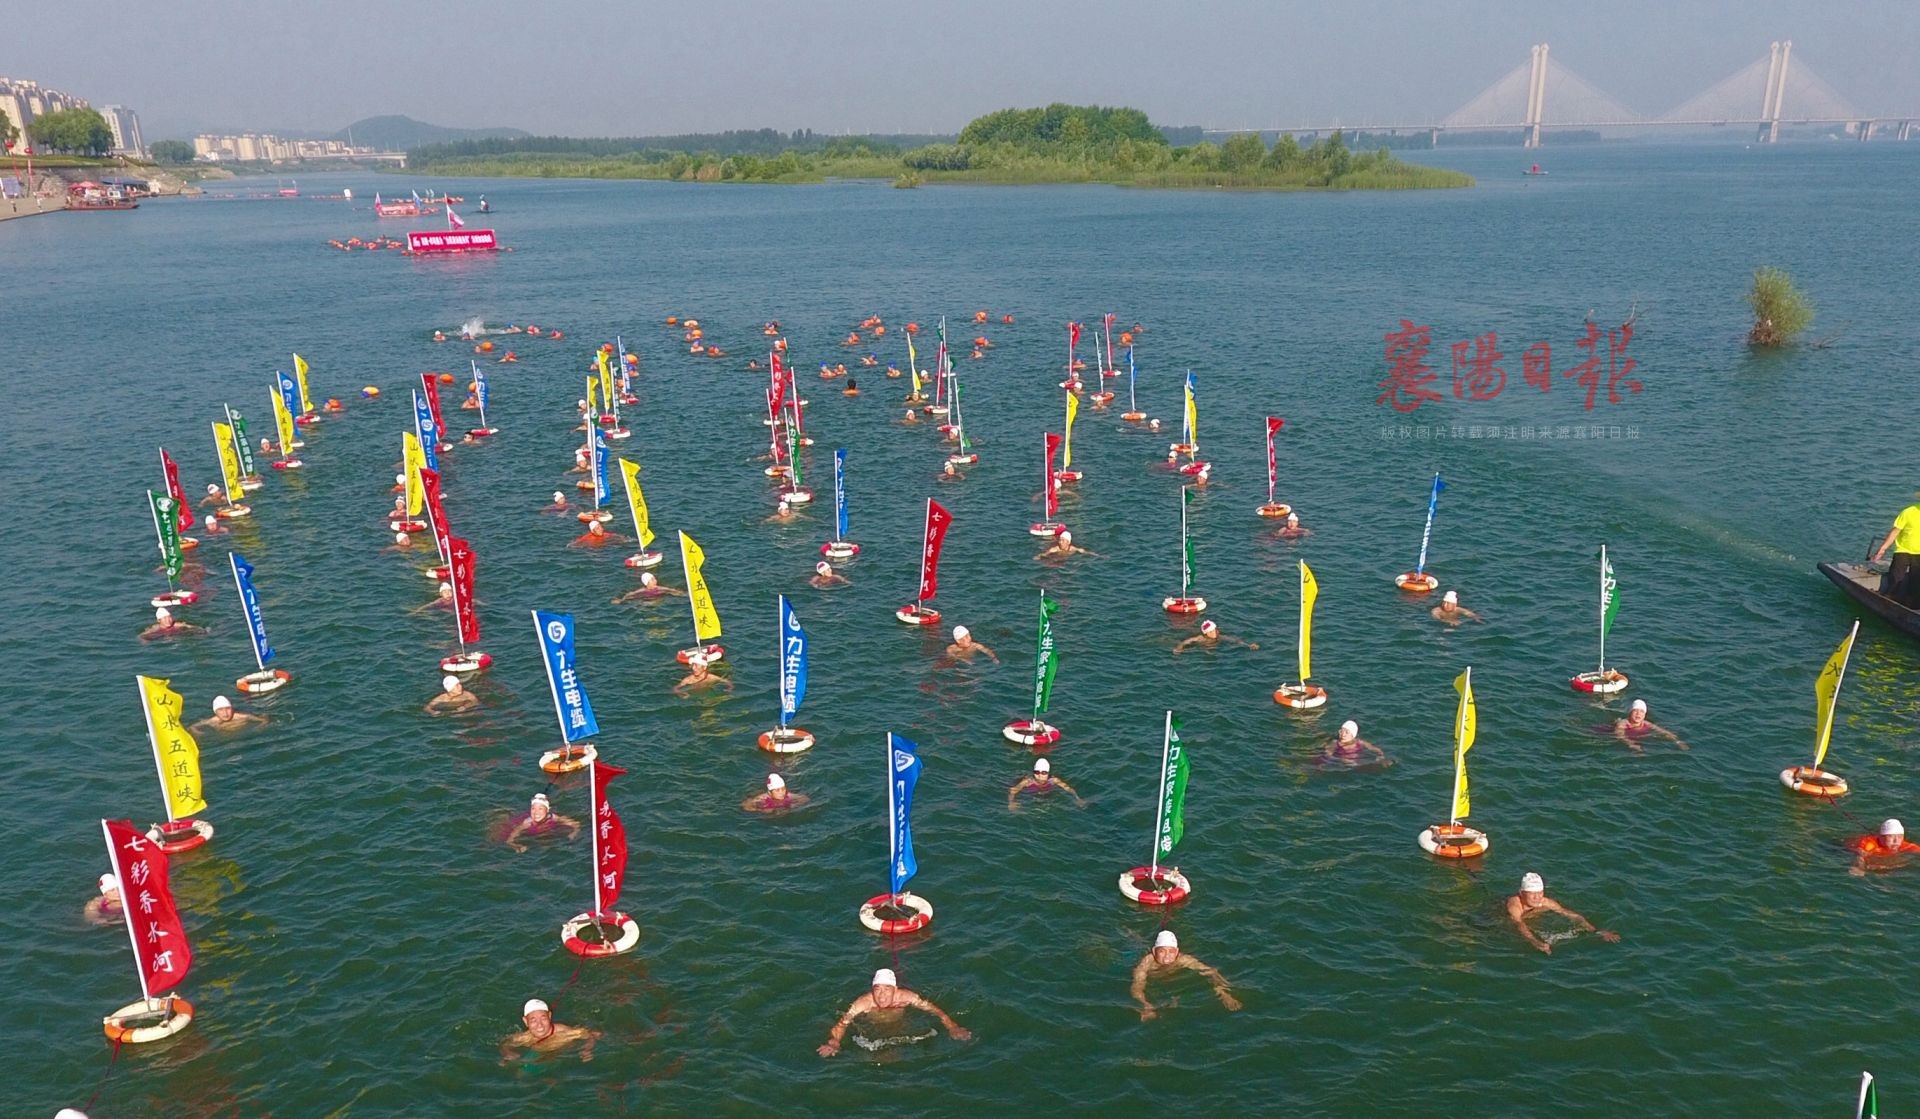 400 Swimmers Decorated the Hanjiang River